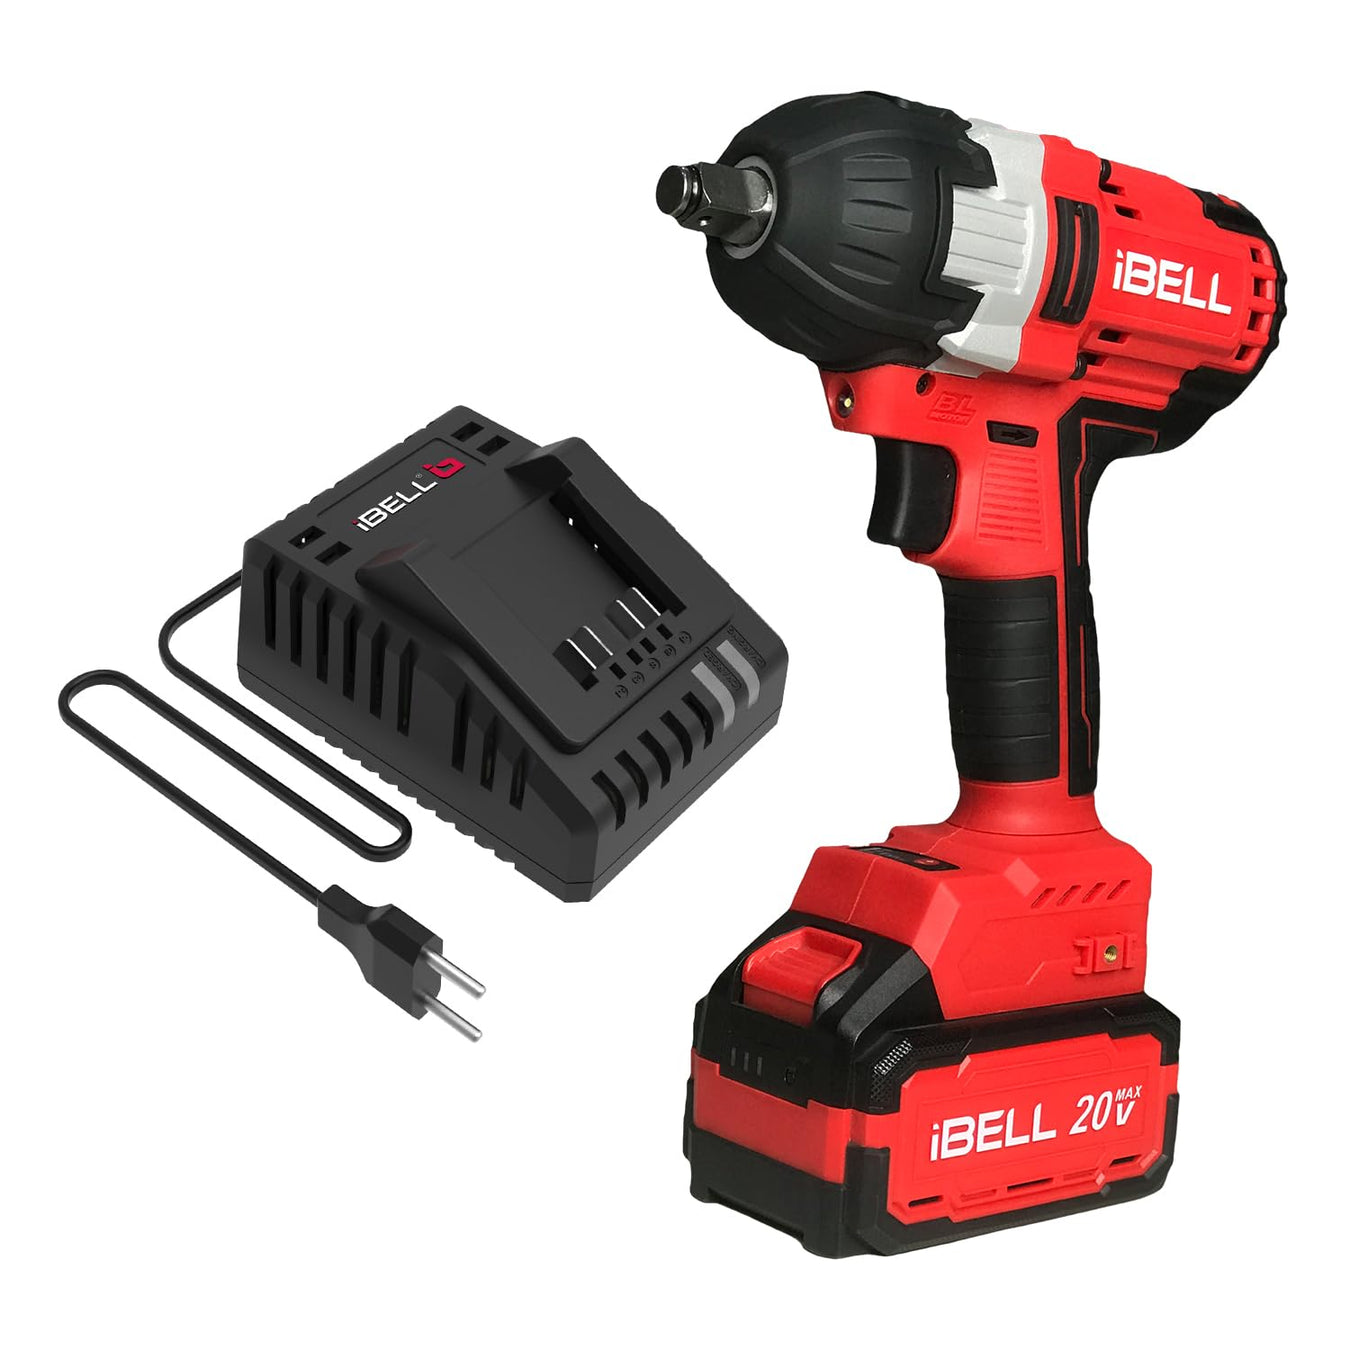 One Power Series Impact Wrench Combo set